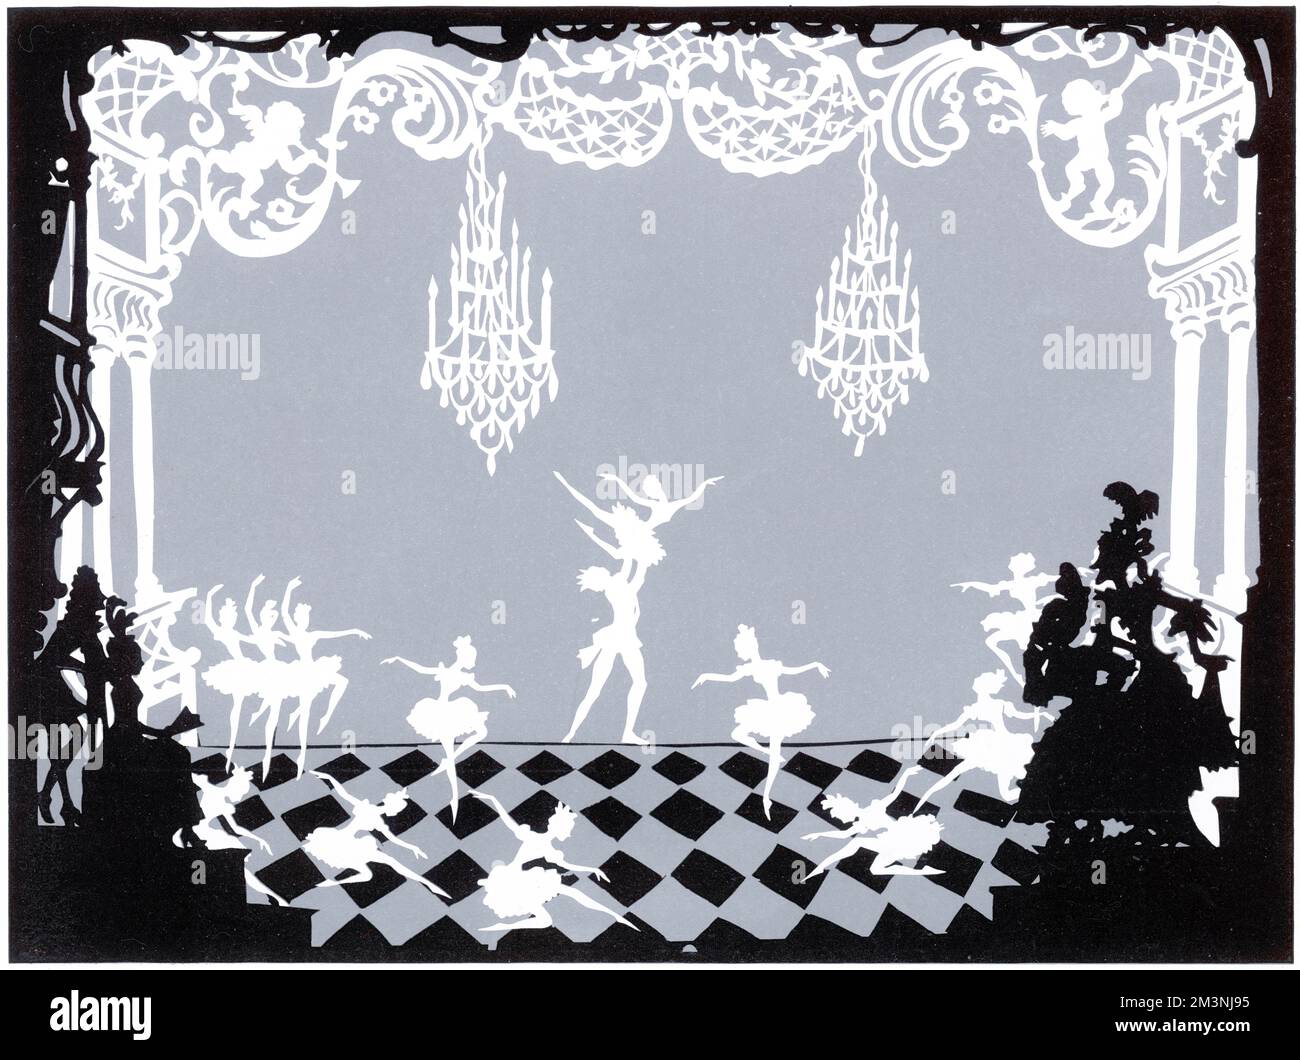 The Ugly Sisters watch with jealousy as Cinderella (in disguise) dances with Prince Charming at the ball.  A scene from a ballet version of Cinderella, based on French and Spanish fairytales.  One version, with music by Prokofiev, was first performed by Sadler's Wells Ballet in 1948.       Date: 1960 Stock Photo